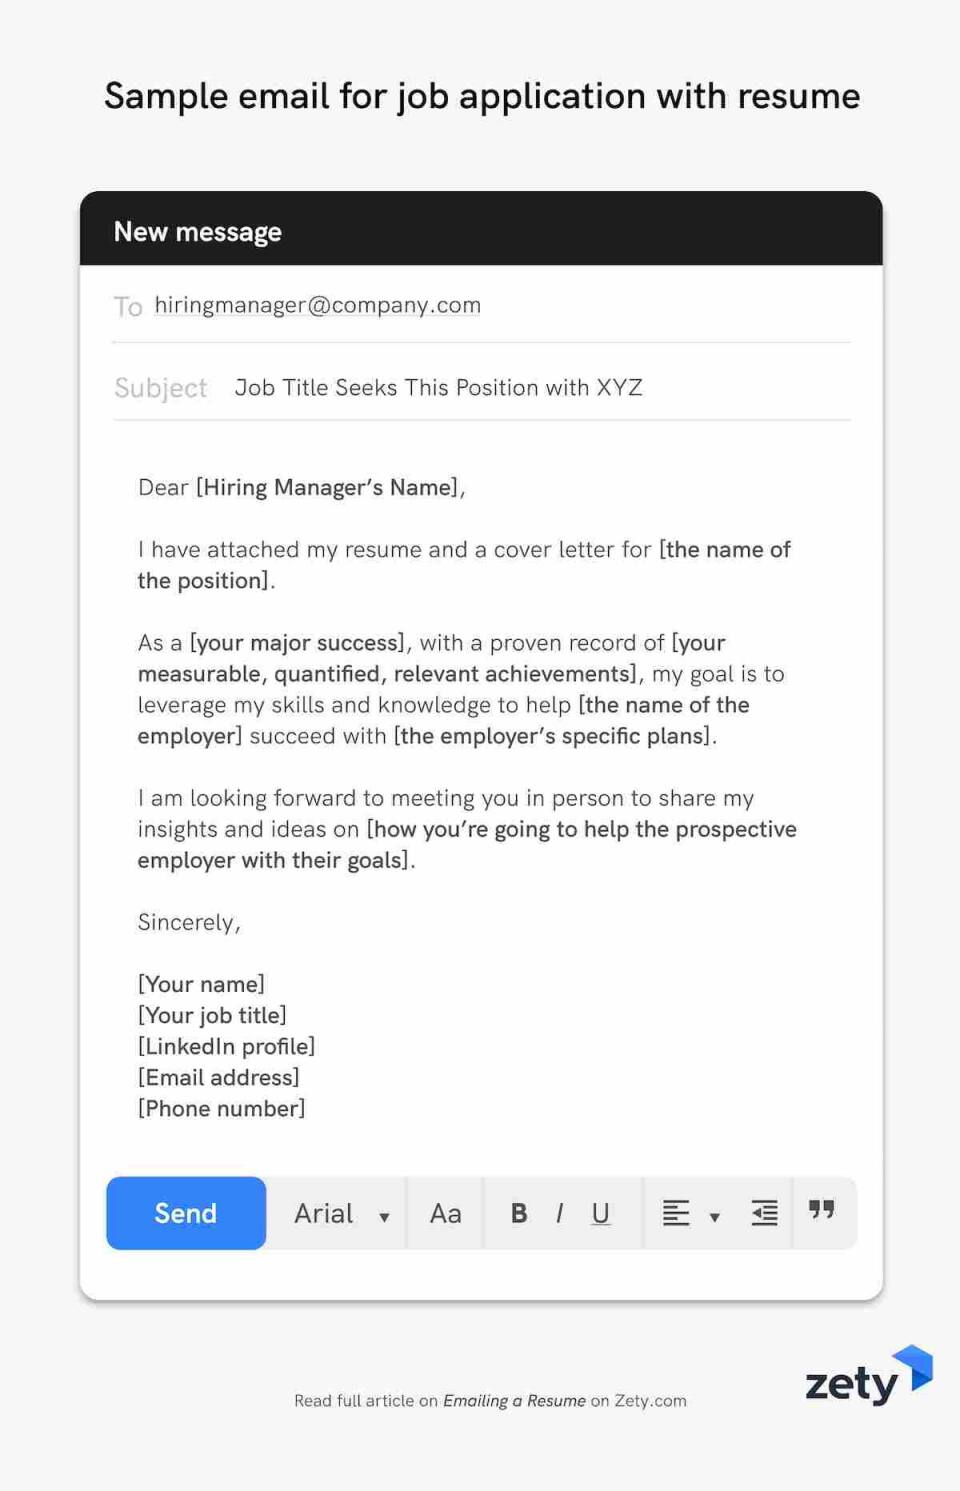 Emailing a Resume: 12+ Job Application Email Samples